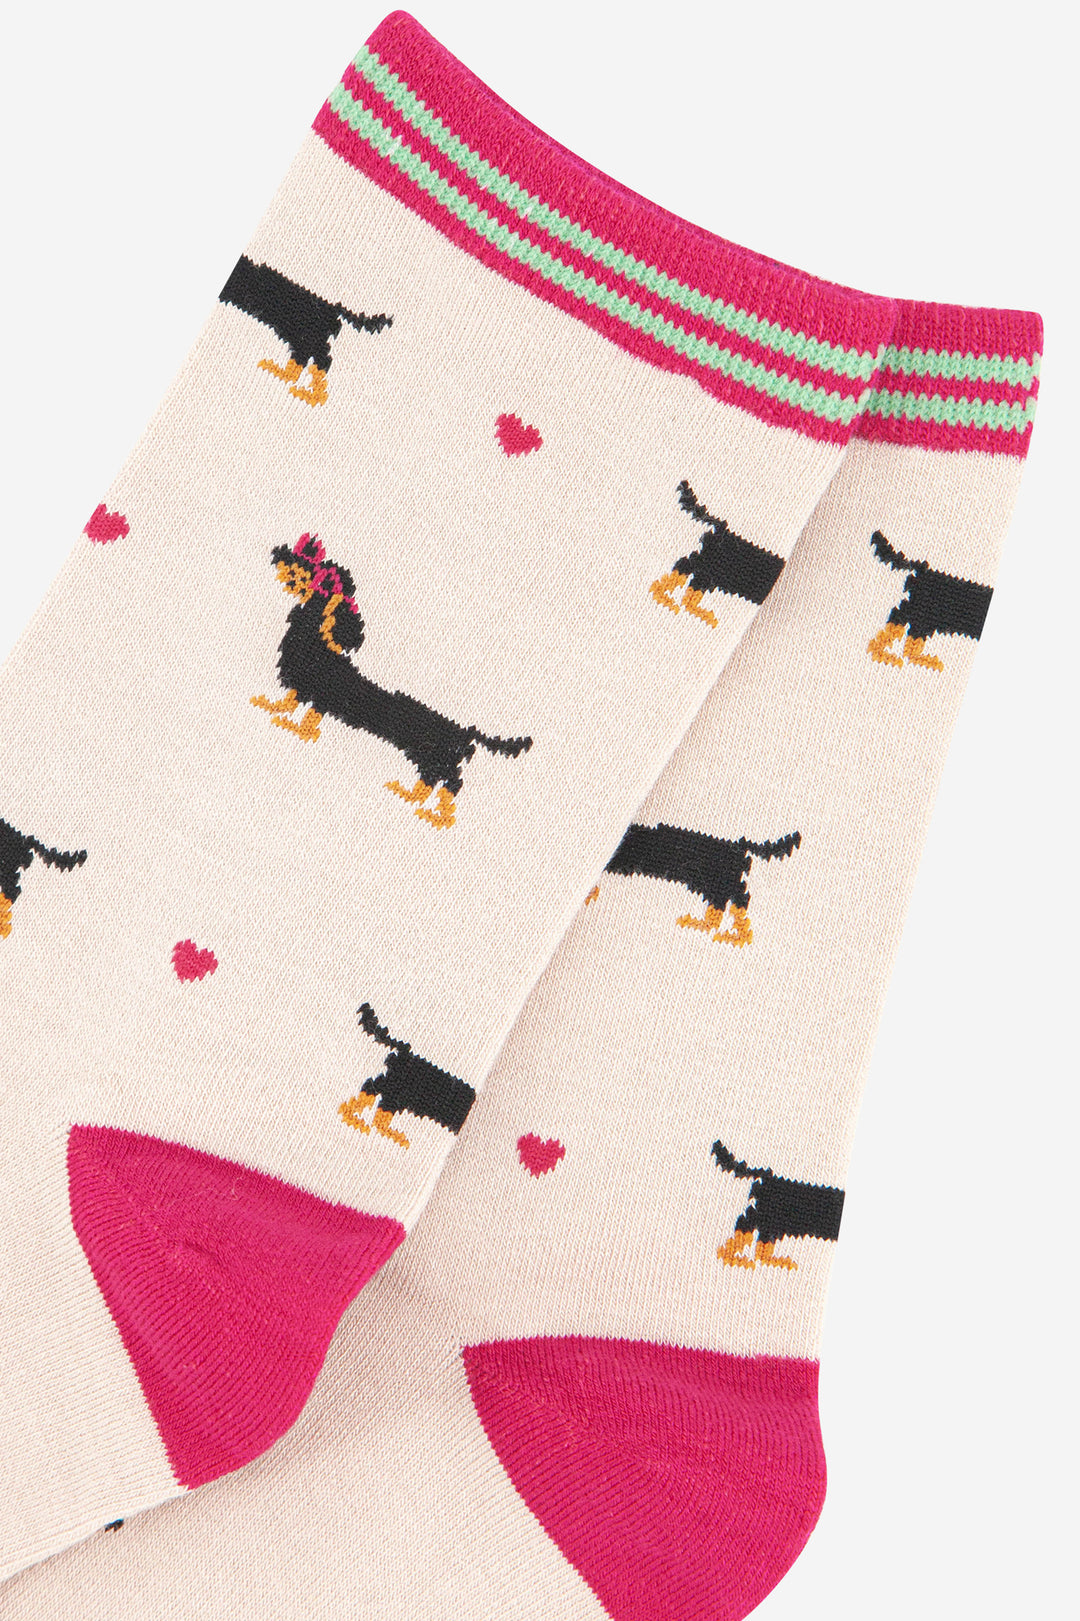 close up of the sausage dog and love heart pattern and striped cuff of the sock